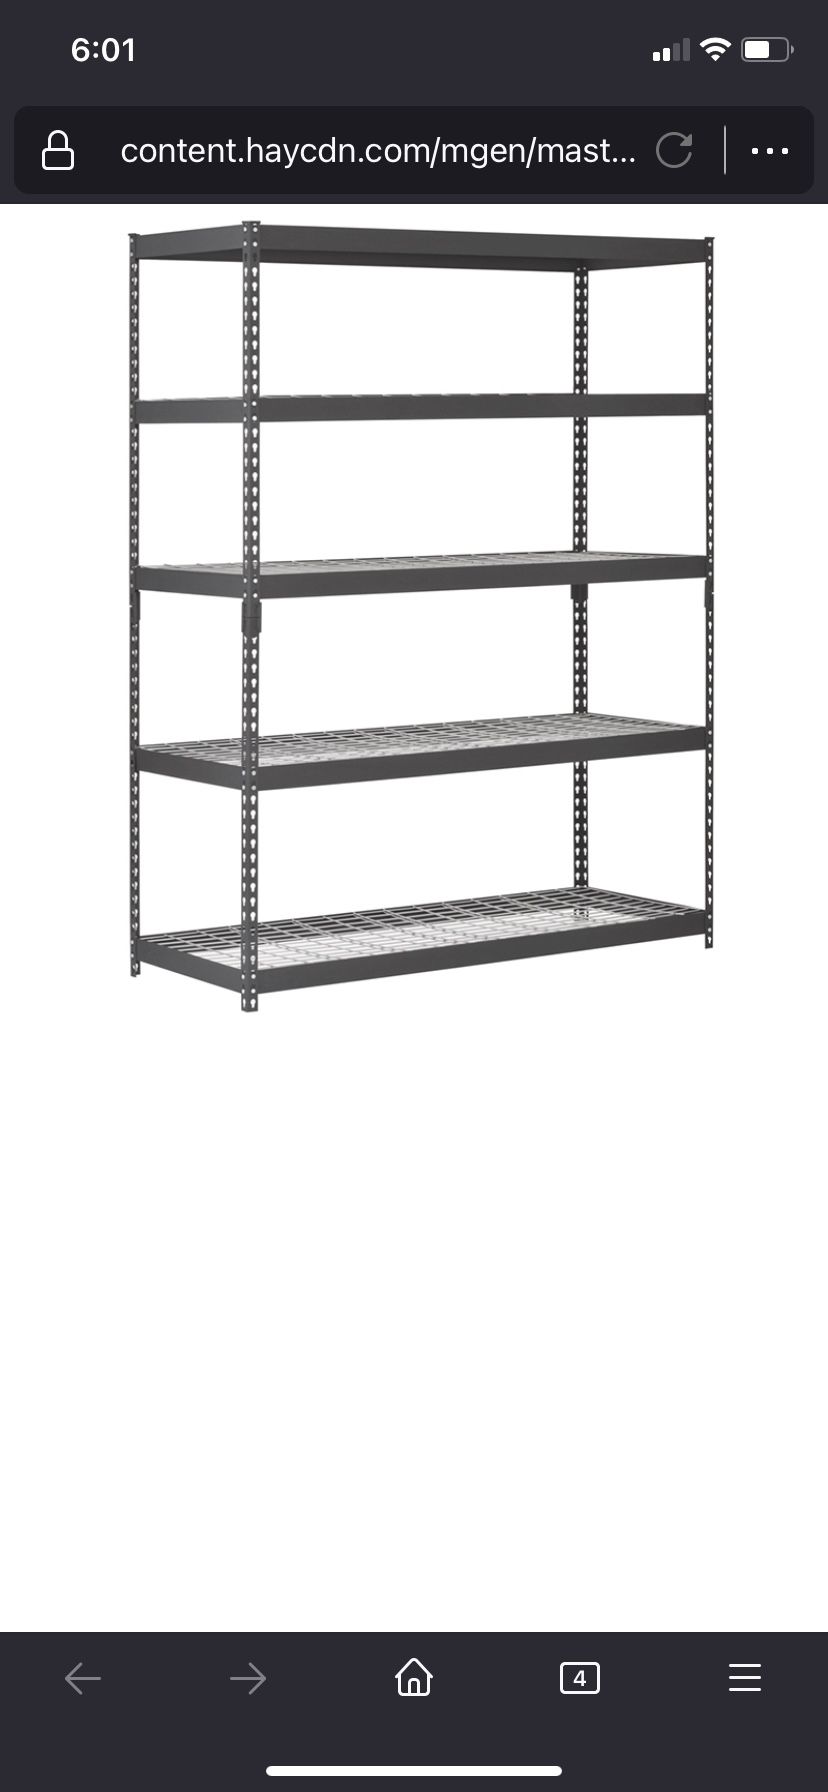 edsal UR1848AZ-BLK Steel Storage Rack, 5 Adjustable Shelves with Post Couplers and Plastic End Caps, 4000 lb. Capacity, 72" Height x 48" Width x 18" D